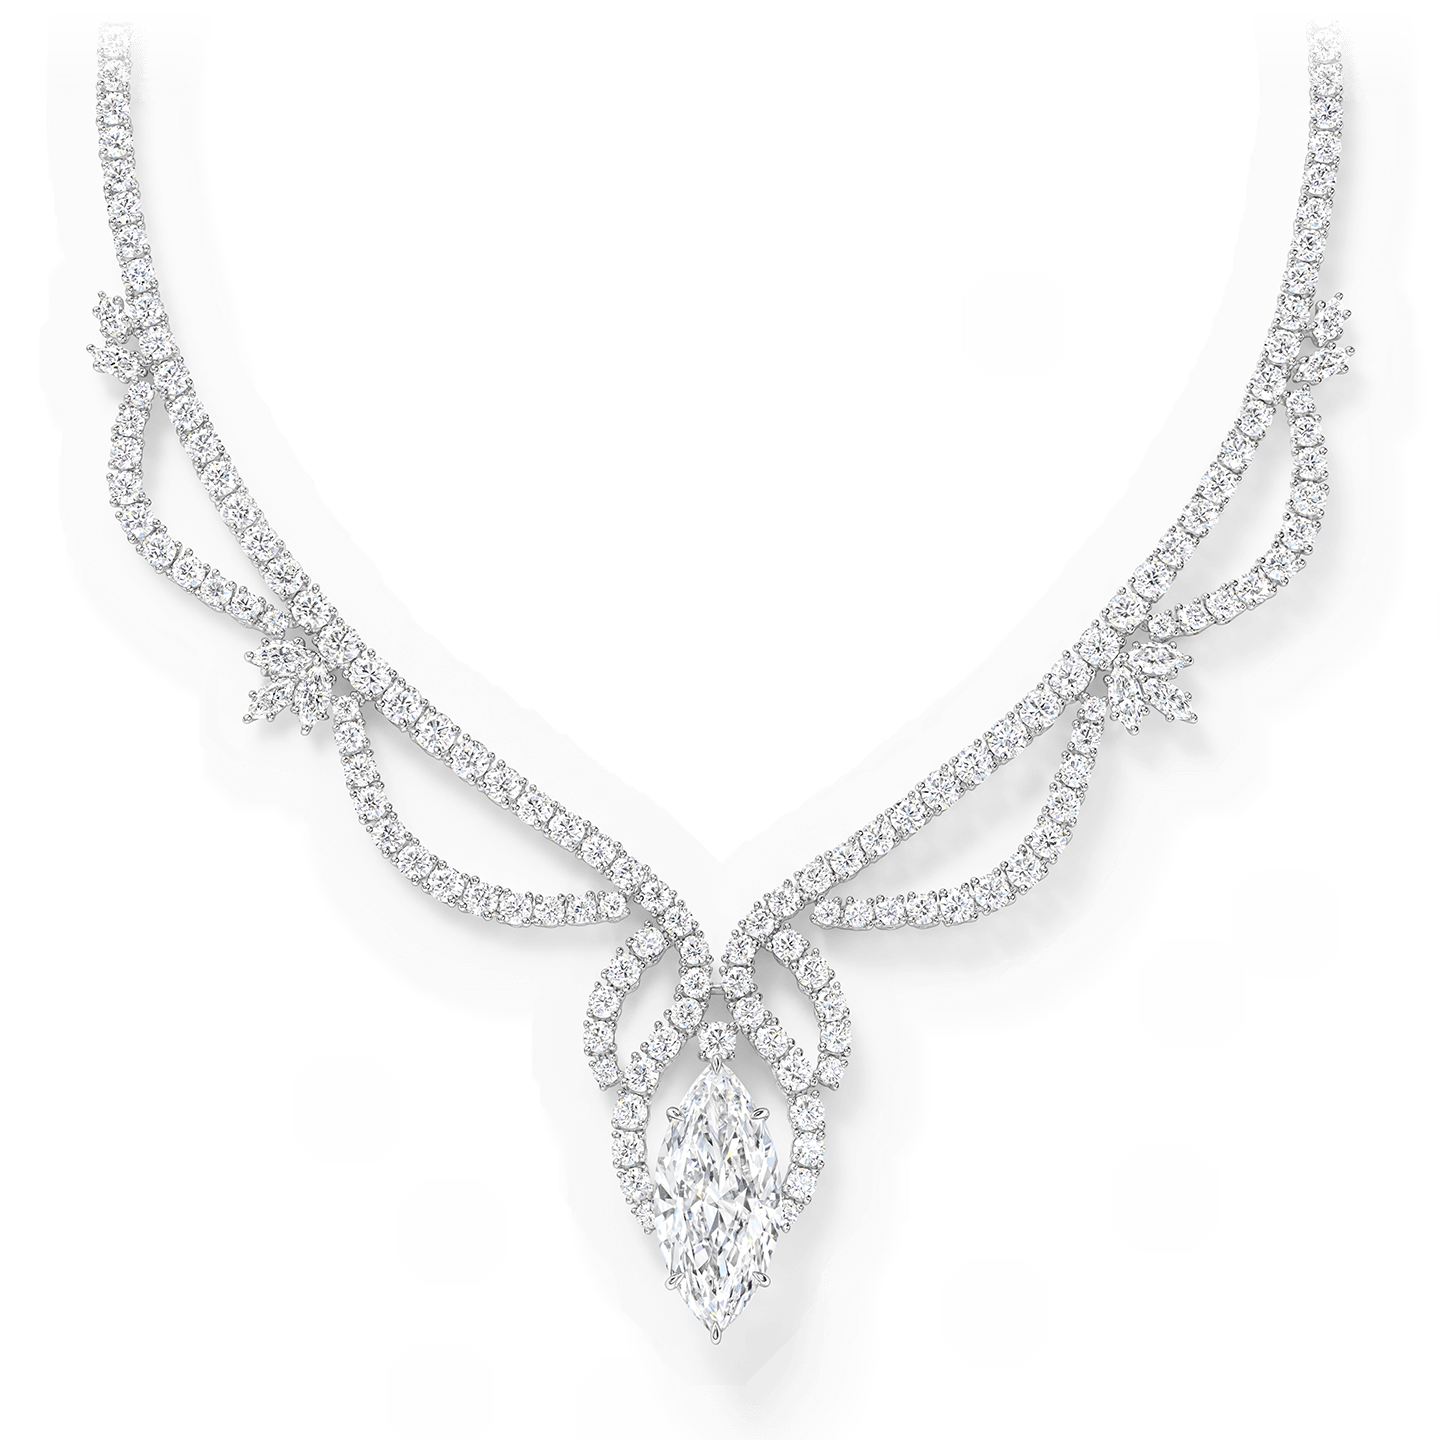 A spectacular diamond necklace featuring a marquise diamond weighing 10.72 carats with 205 marquise and round brilliant diamonds set in platinum